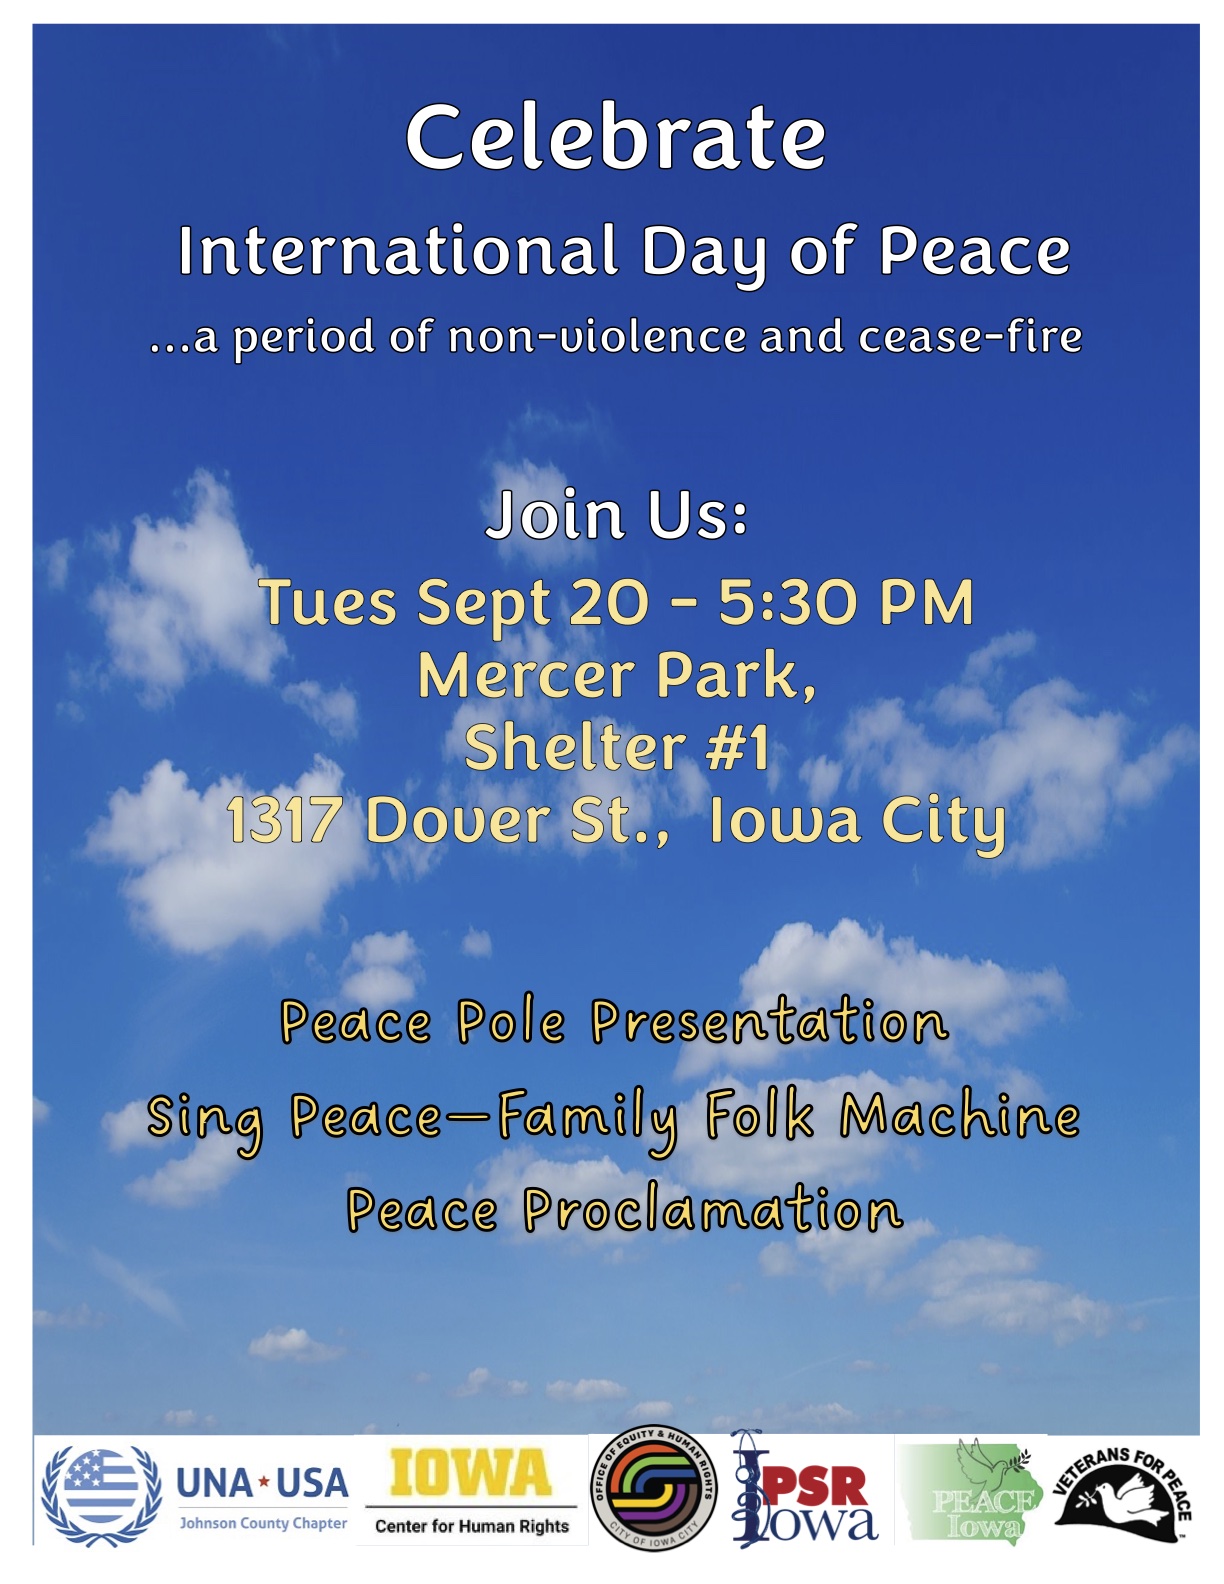 Celebrate International Day of Peace...a period of non-violence and cease-fire. Tues Sept 20 - 5:30 PM, Mercer Park, Shelter #1, 1317 Dover St., lowa City. Activities include: Peace Pole Presentation; Sing Peace - with Family Folk Machine; Peace Proclamation